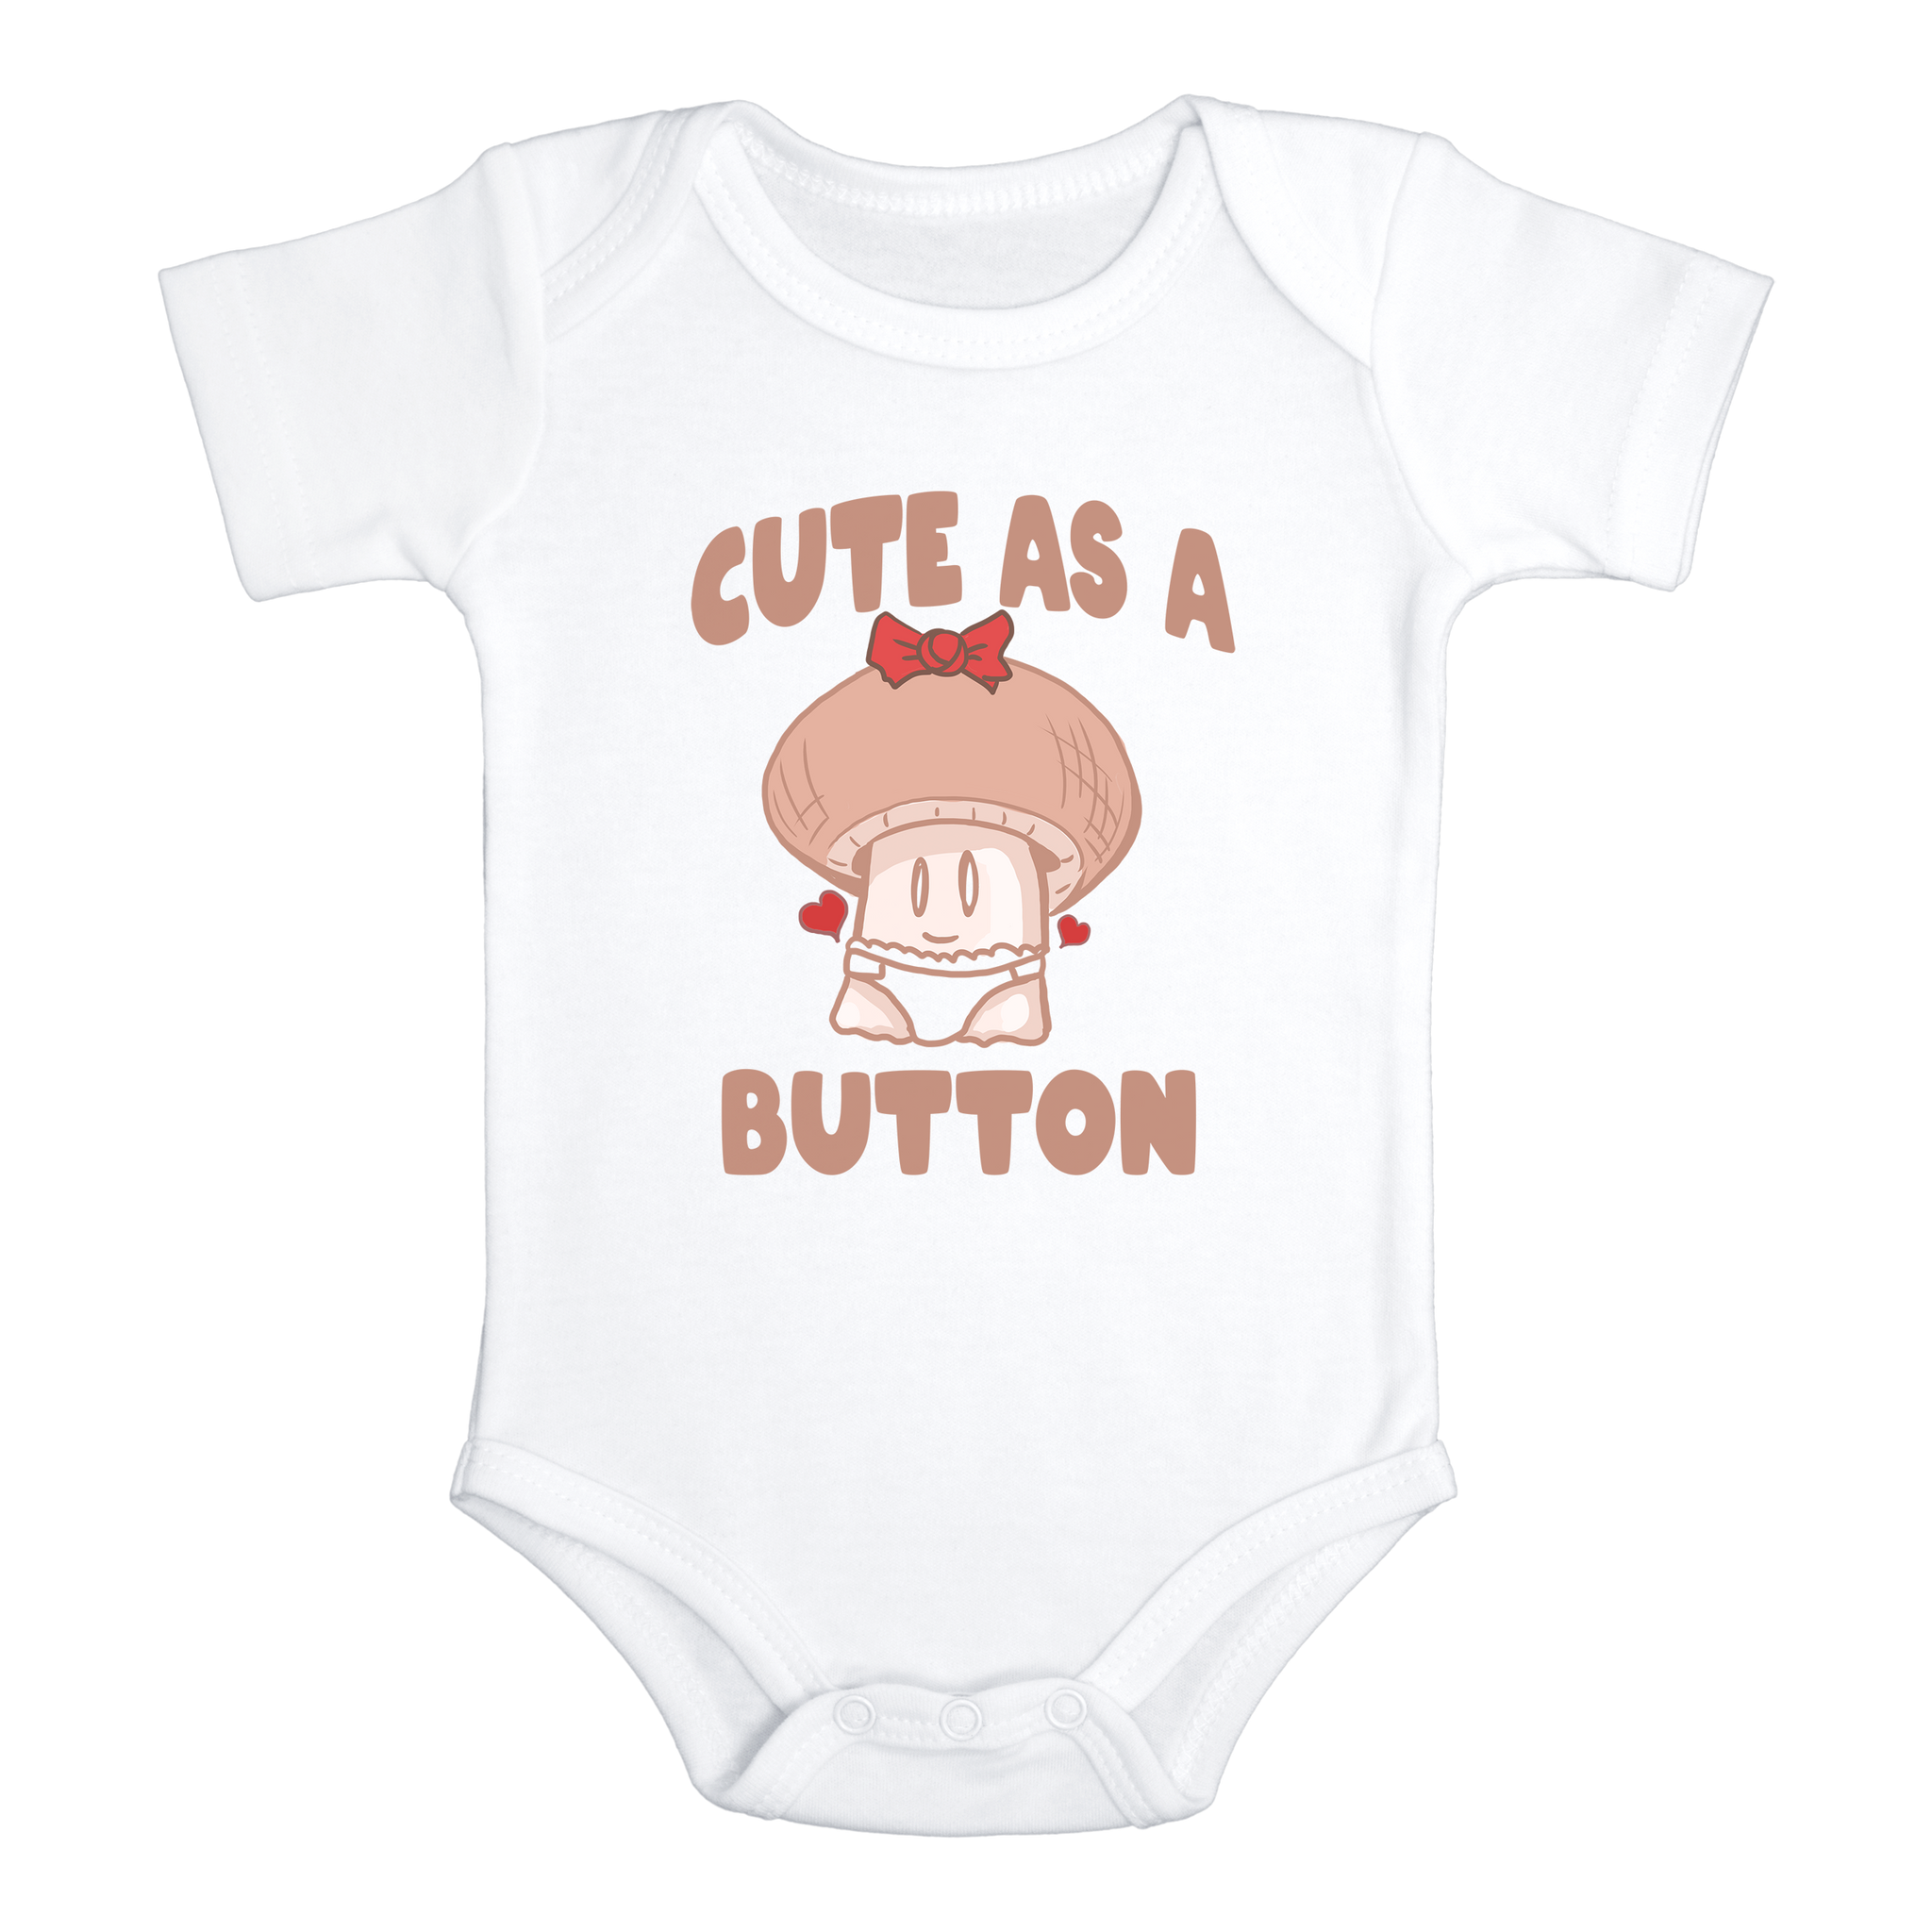 CUTE AS A BUTTON Funny baby onesies bodysuit (white: short or long sleeve) - HappyAddition